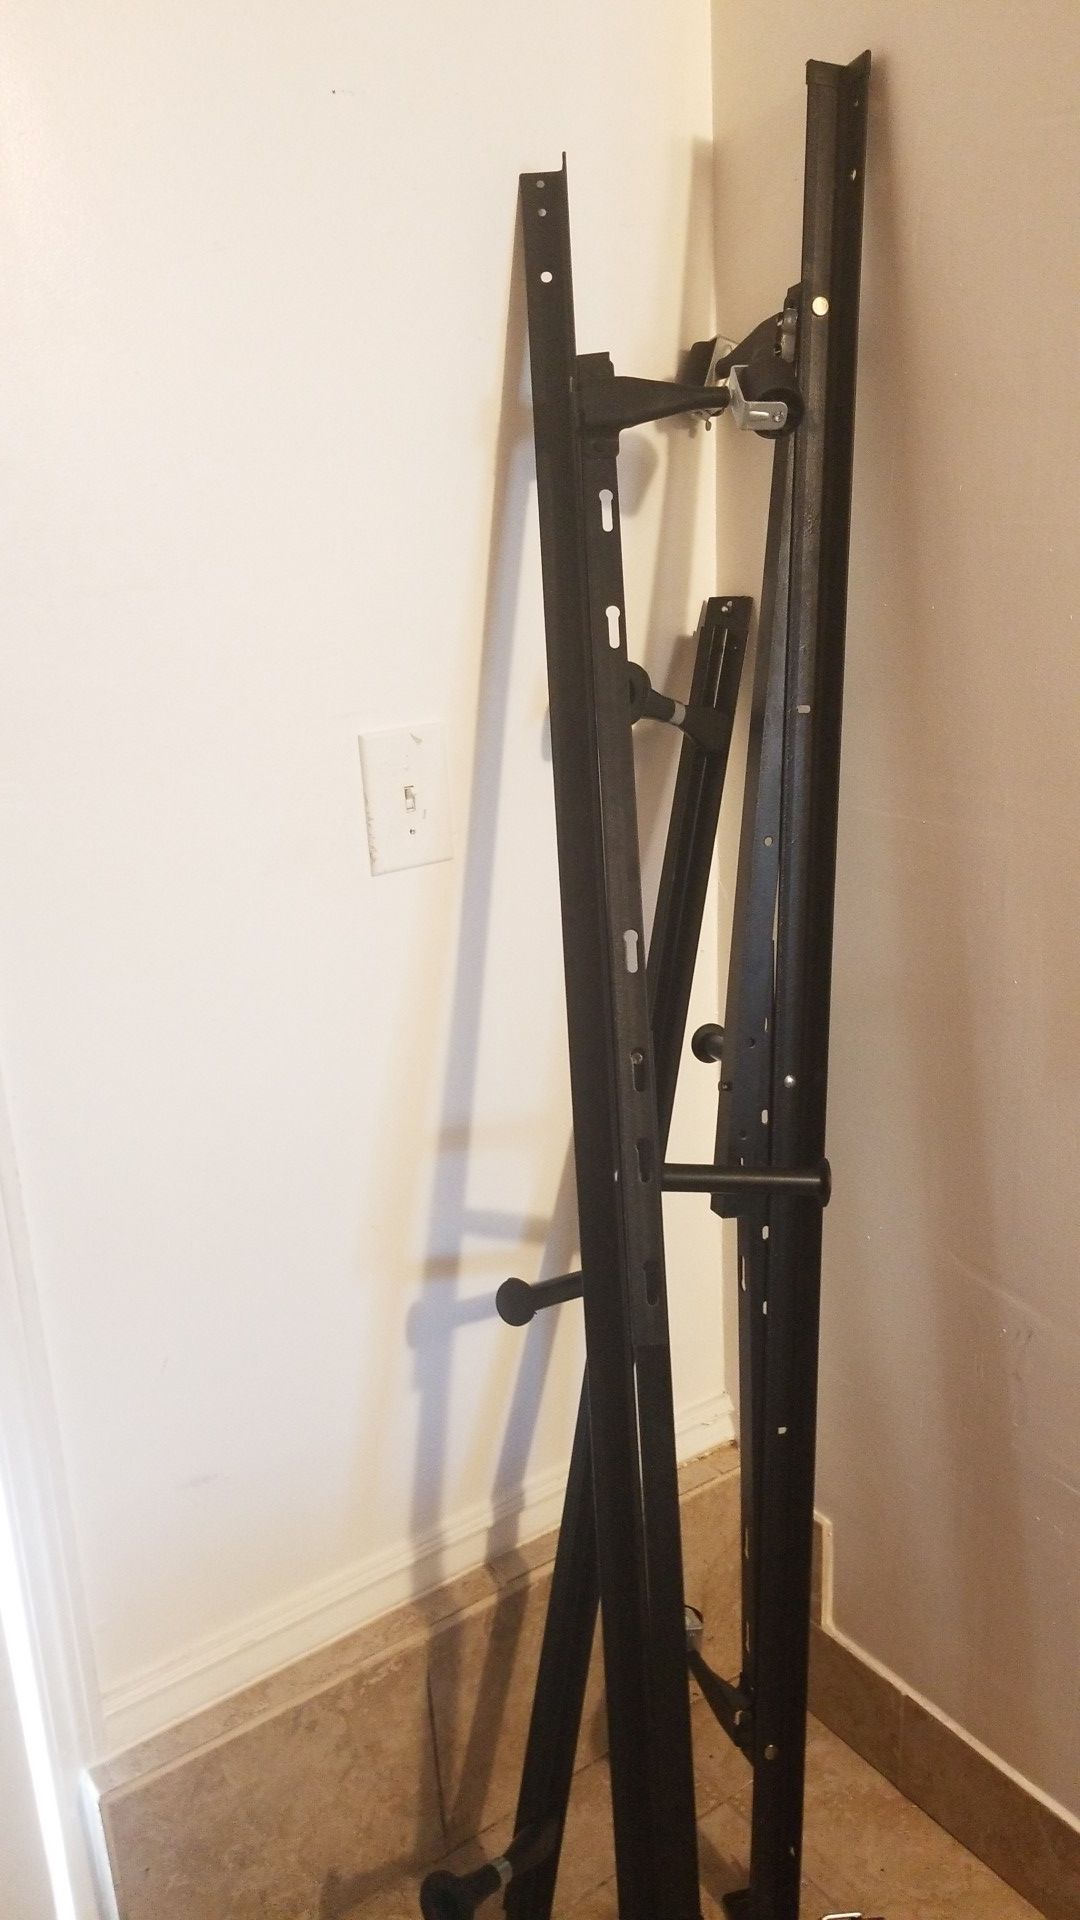 Free Queen sized bed frame. Quick install